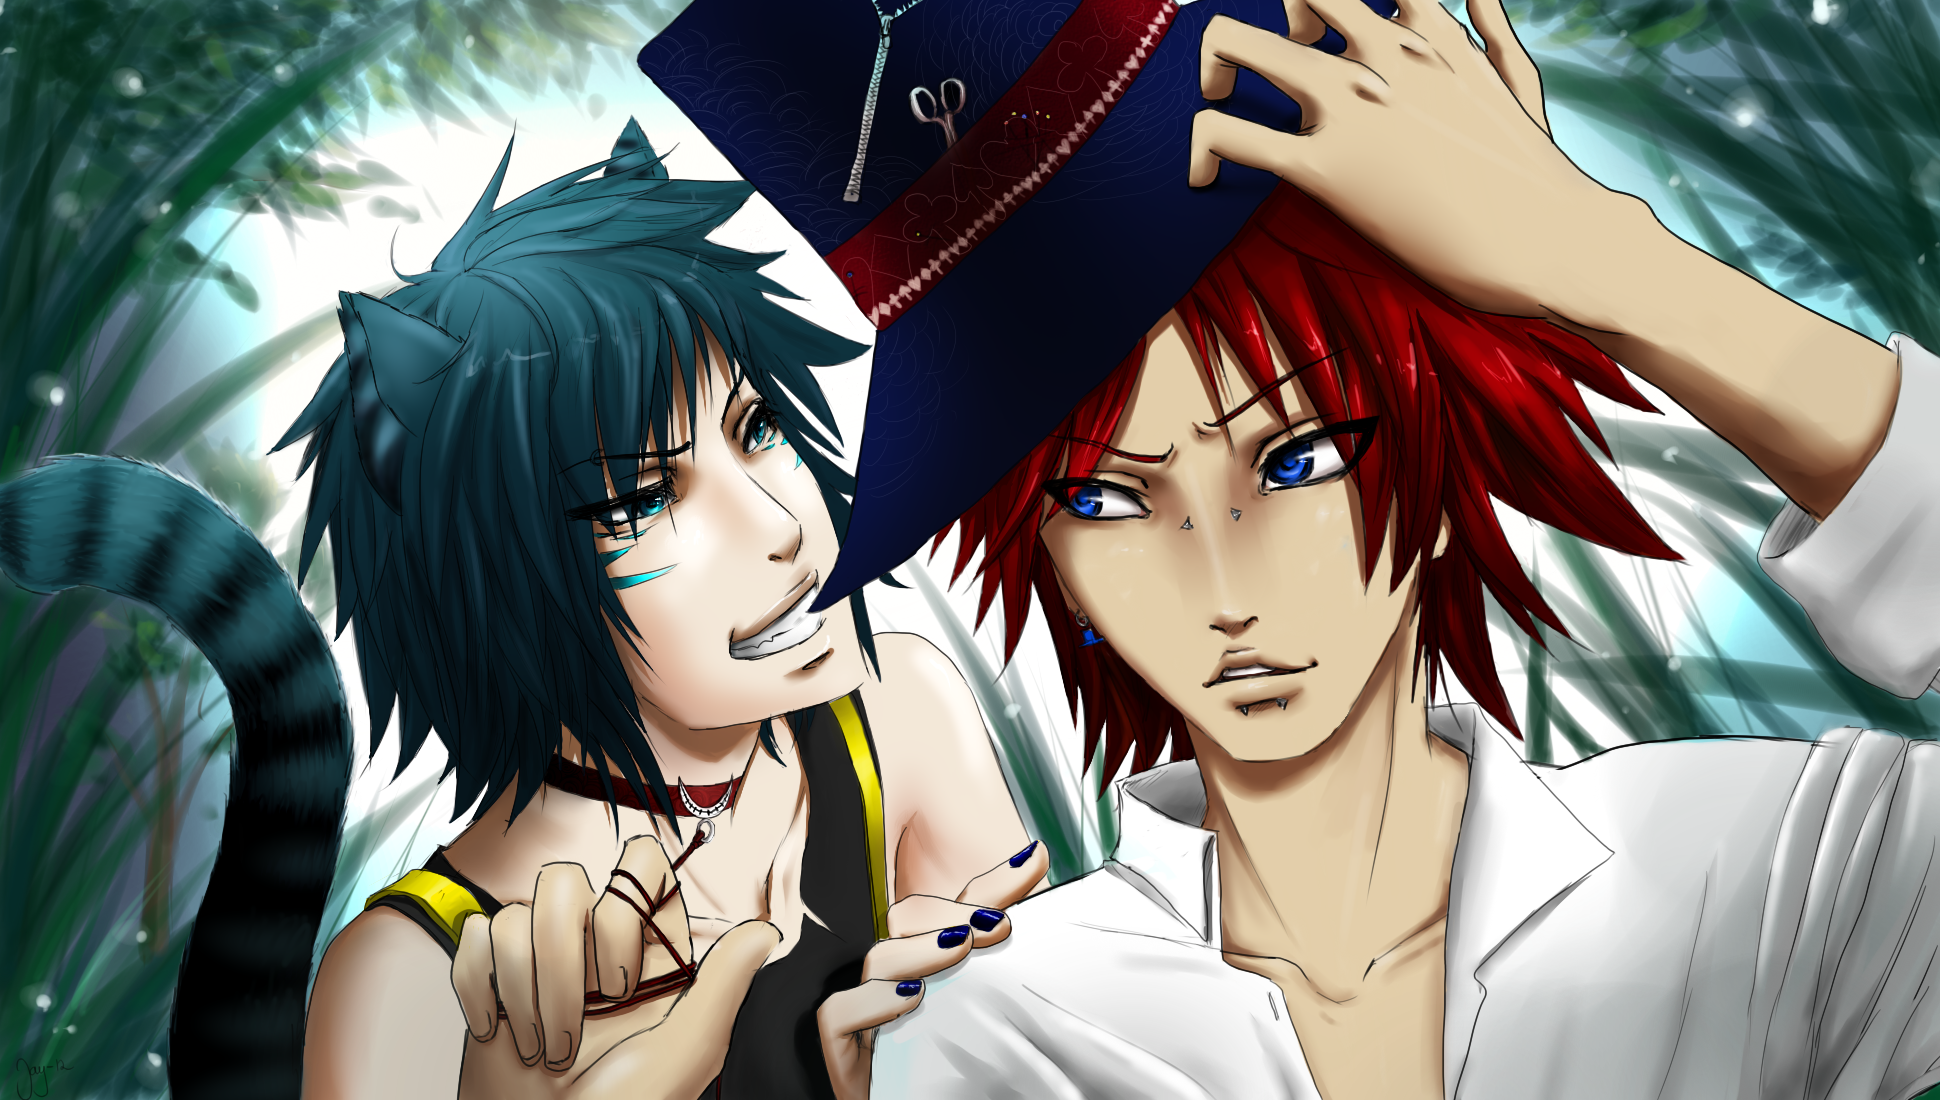 mad_hatter_and_the_grinning_cheshire_cat_by_jayyaj95-d4w08k3.png